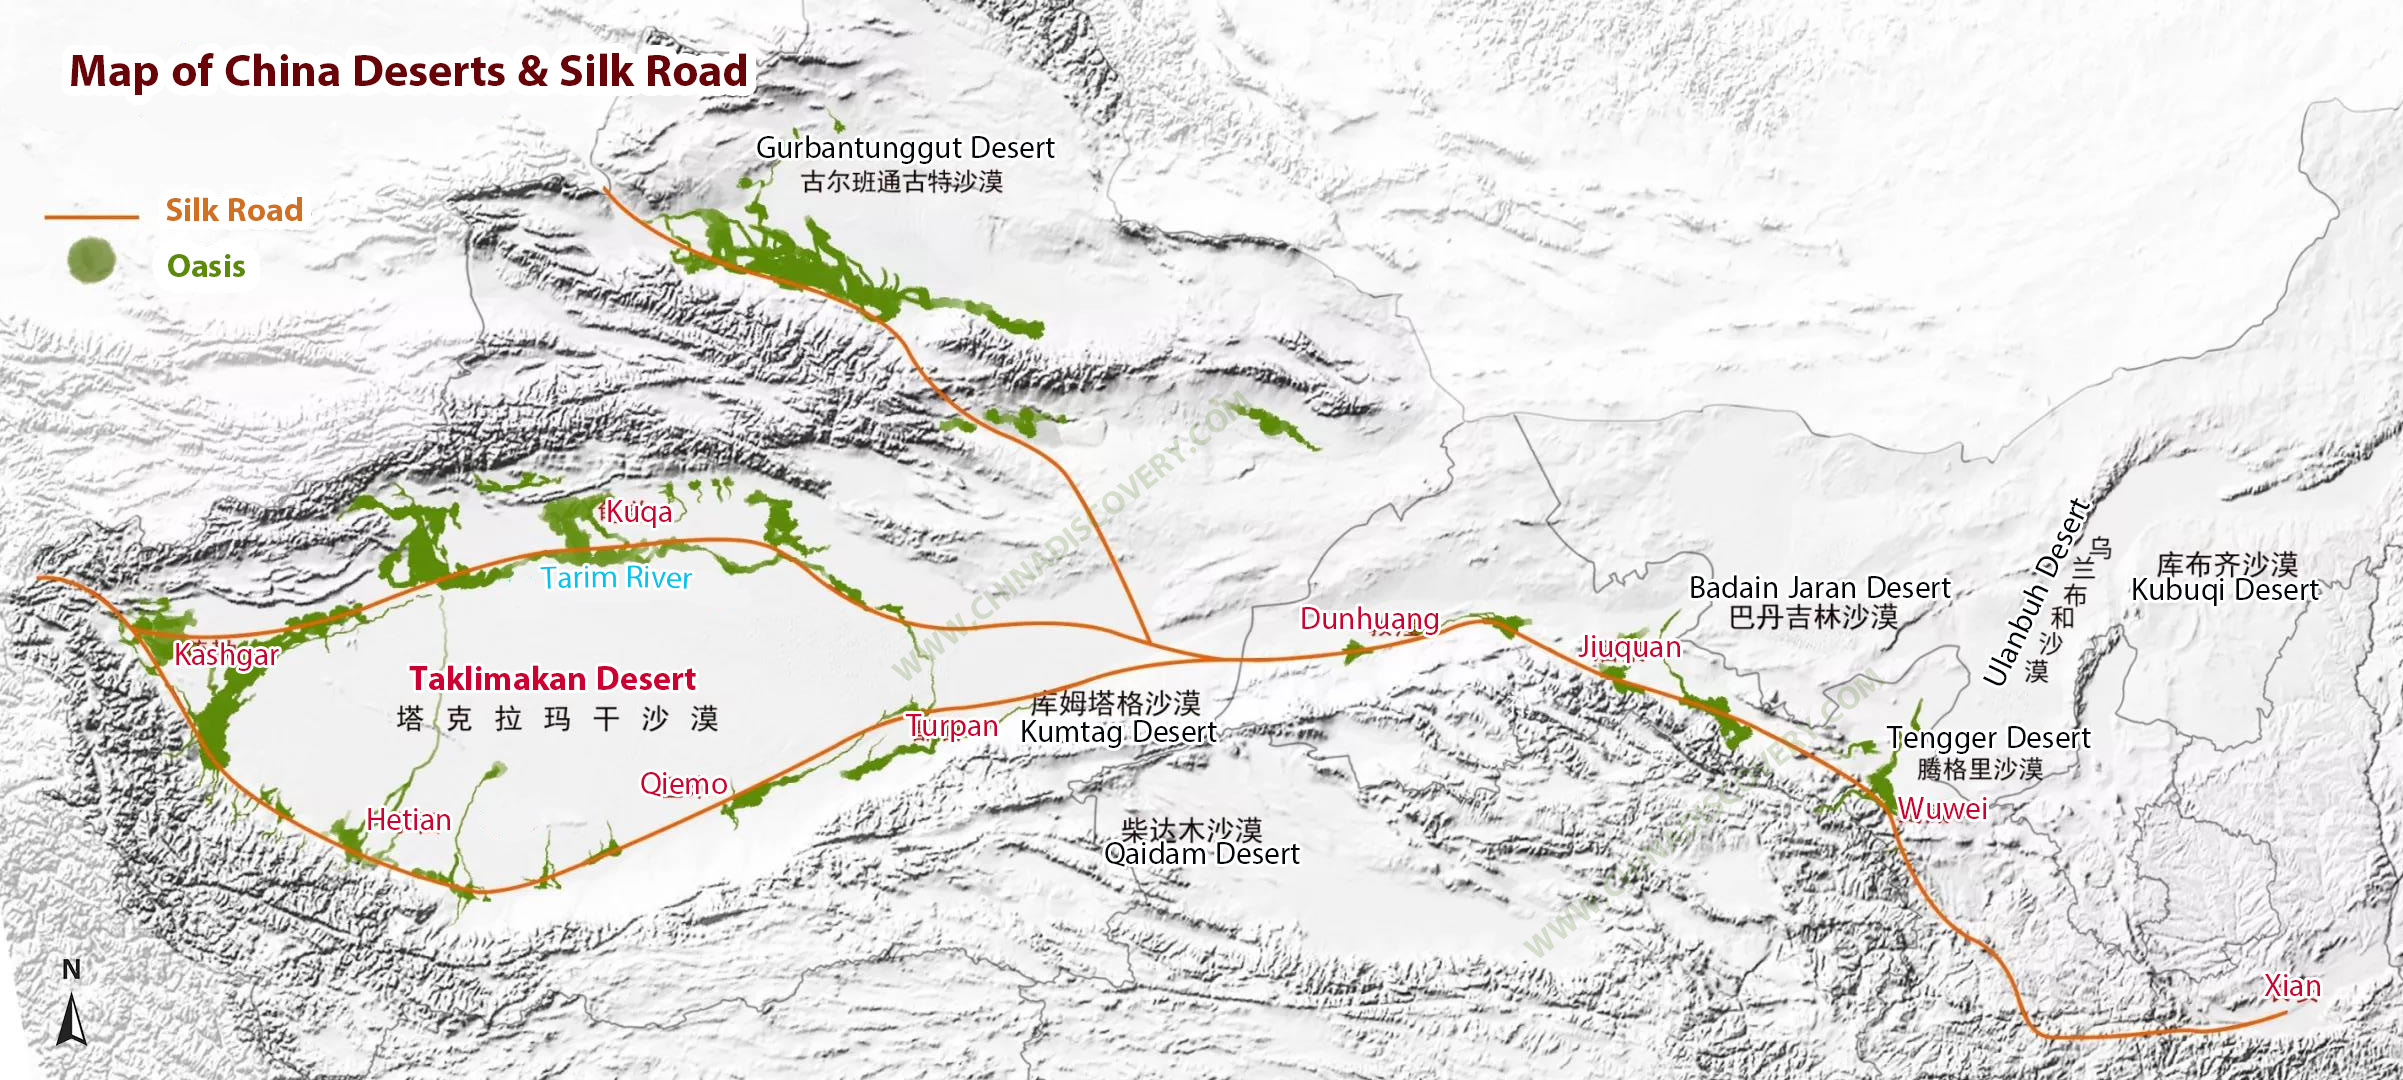 Map of China Deserts and Silk Road